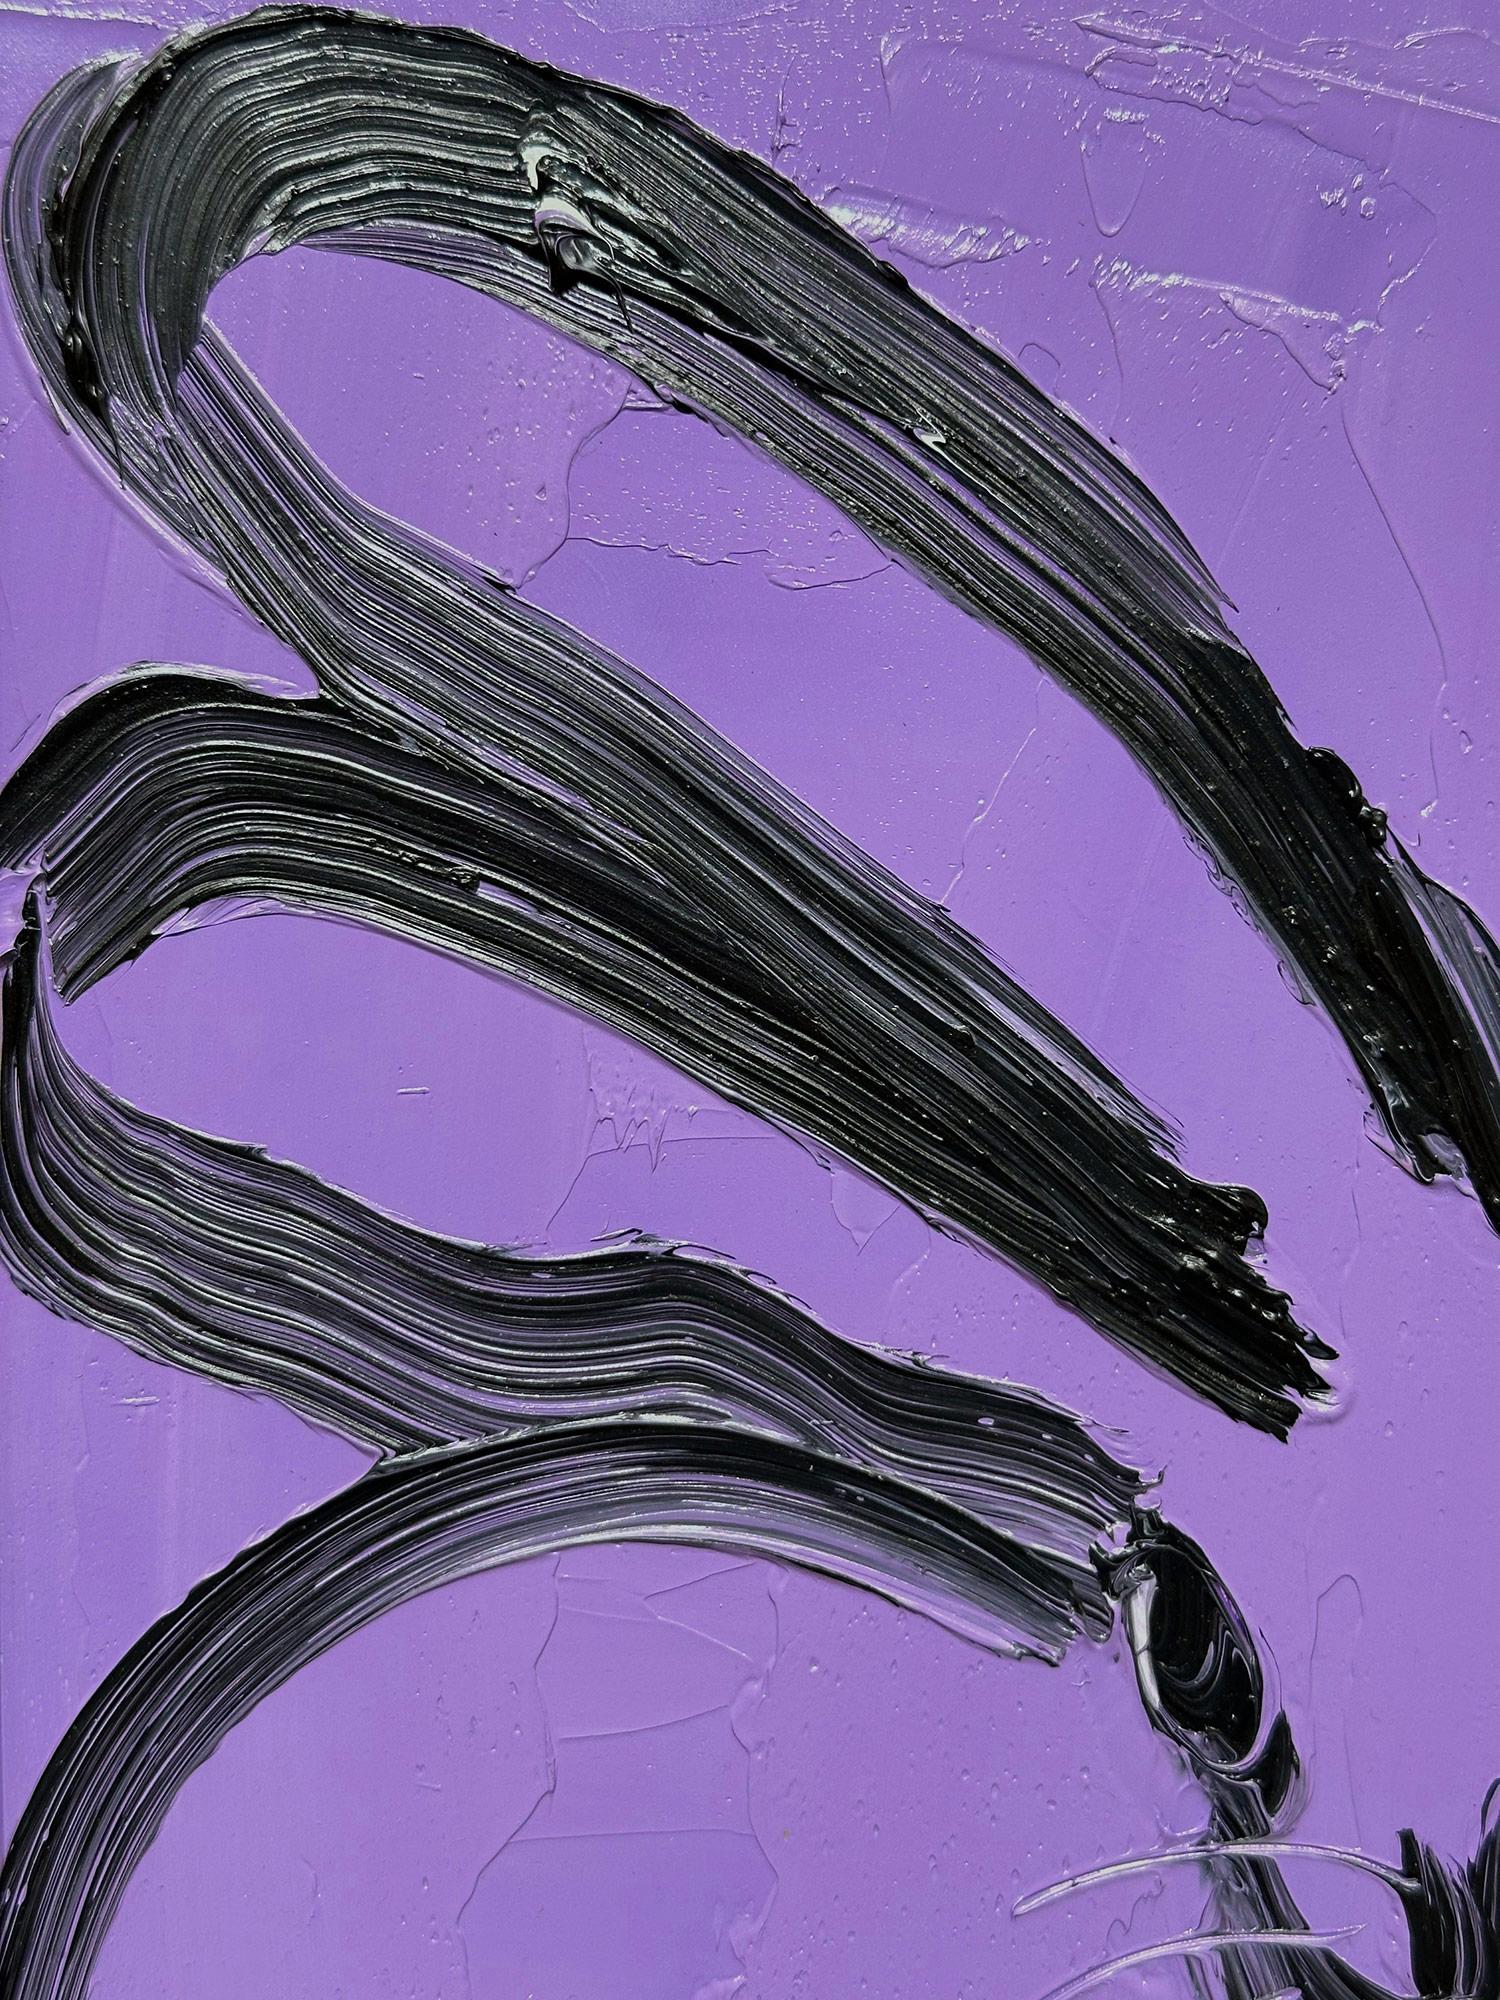 A wonderful composition of one of Slonem's most iconic subjects, Bunnies. This piece depicts a gestural figure of a black bunny on a Purple Lavender background with thick use of paint. It is housed in a wonderful black frame with silver details.